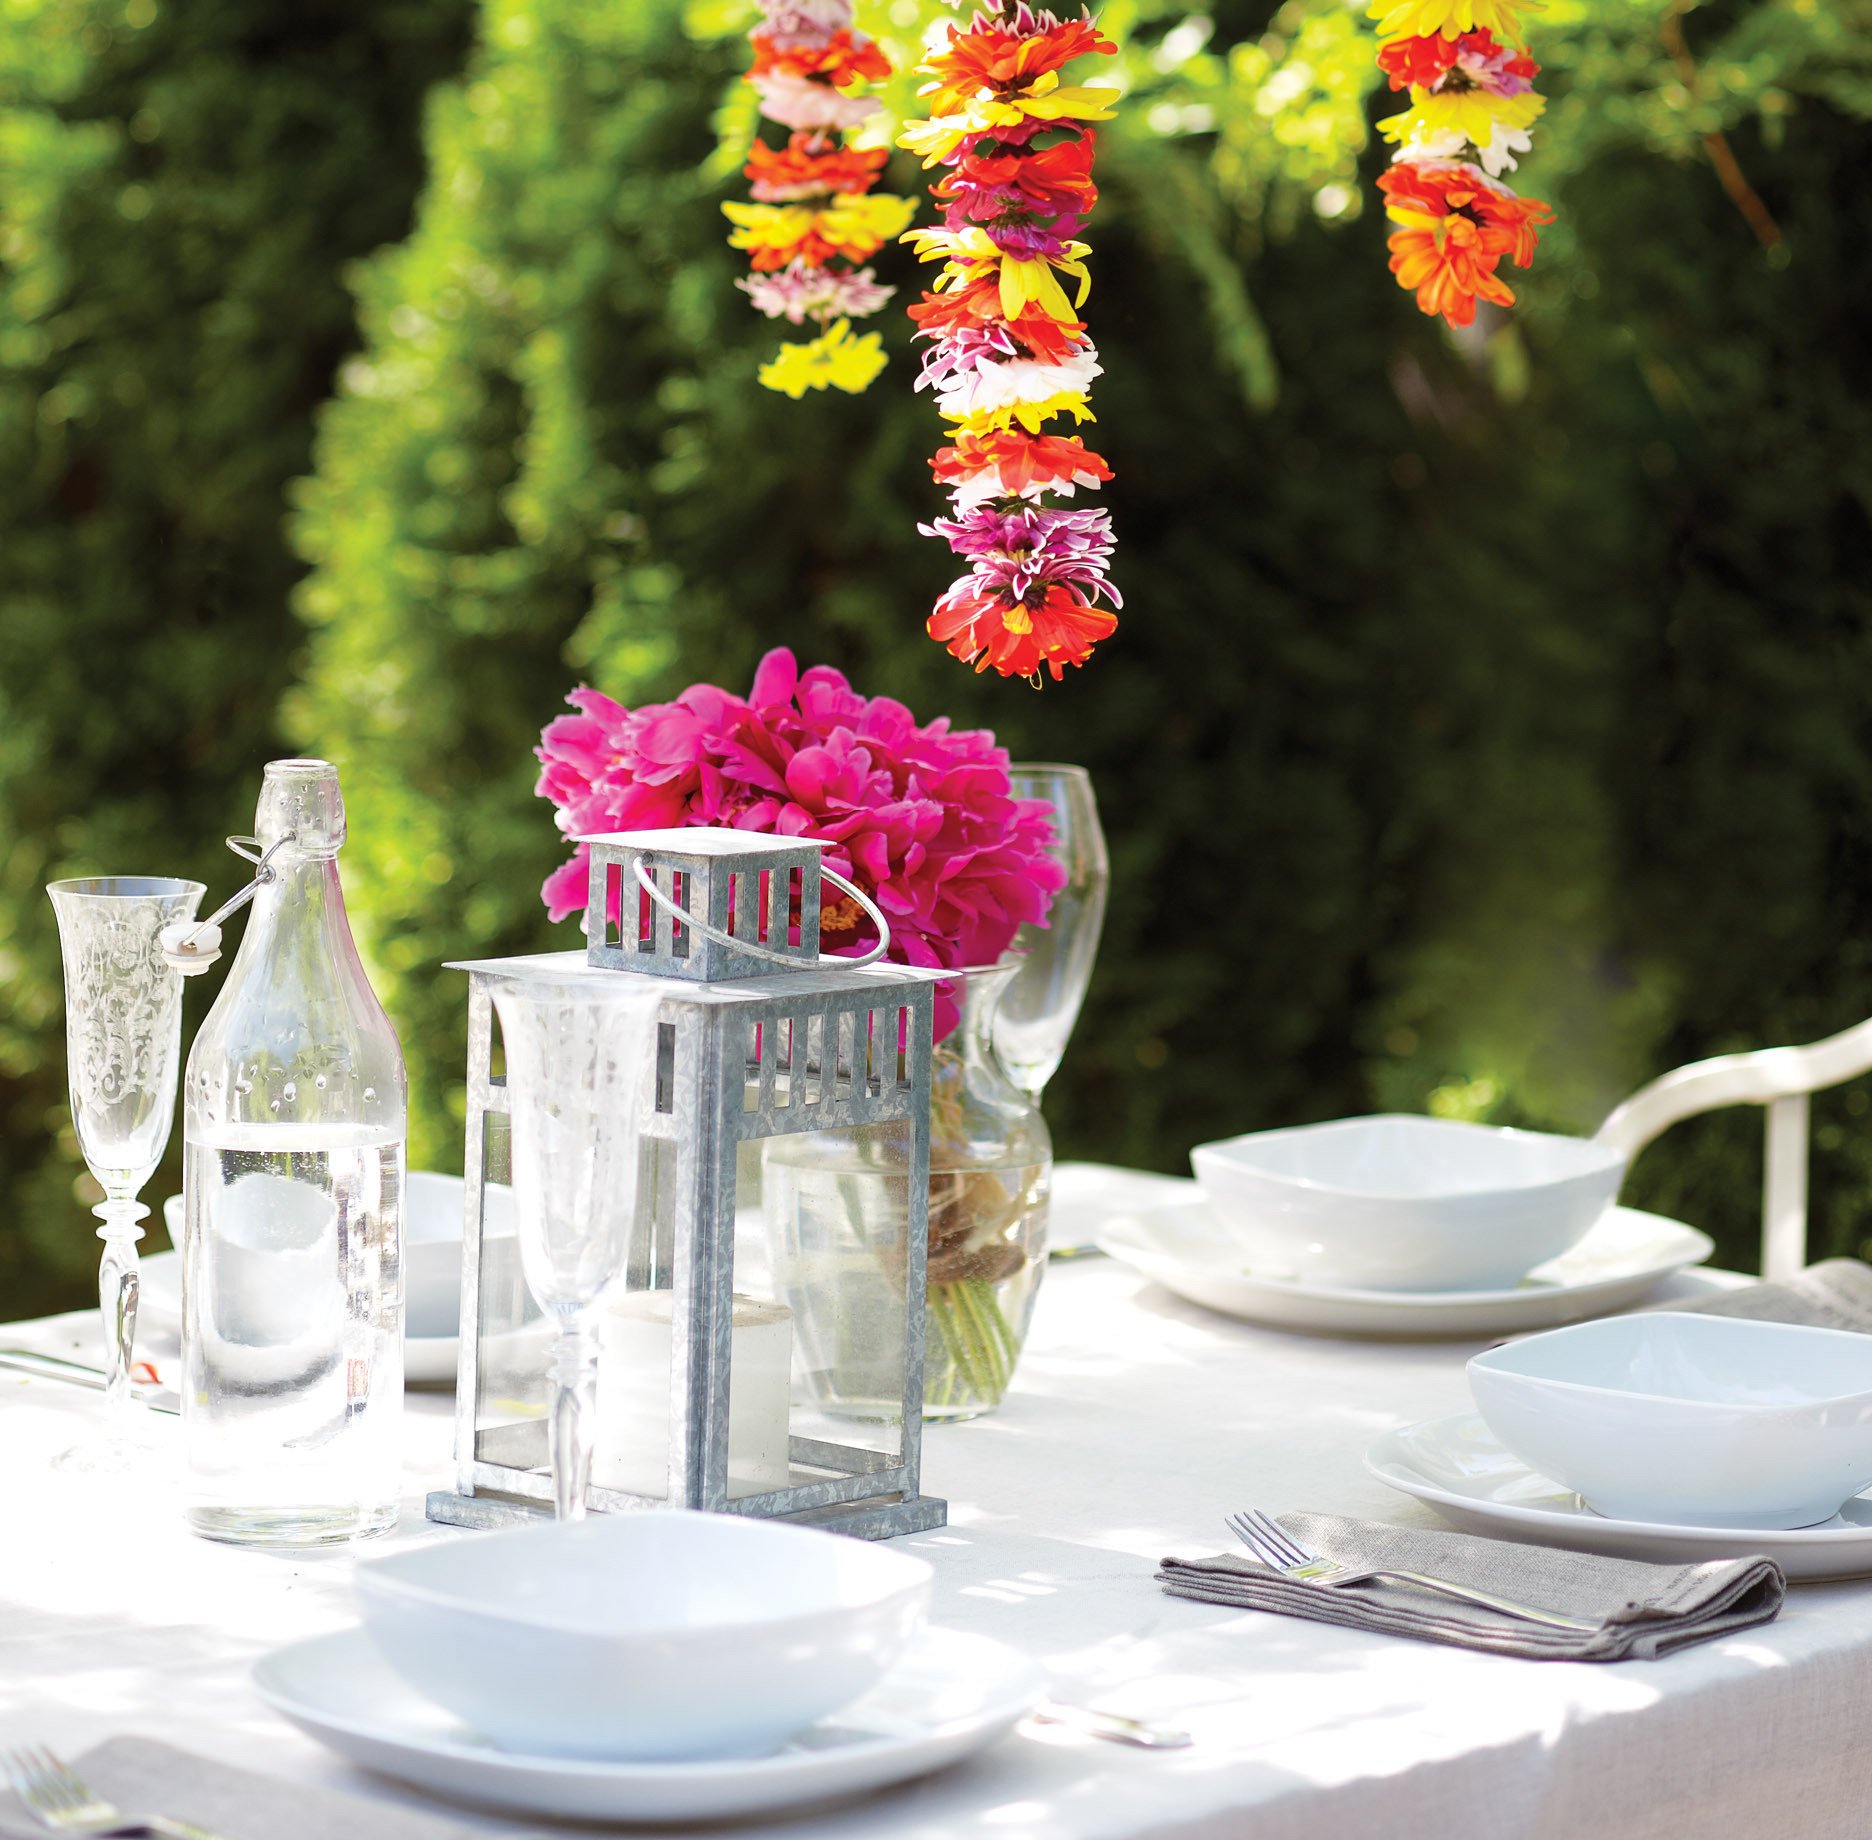 Outdoor table with hanging flowers, white dishware, champagne flutes, flower garlands, backyard party, dinner party